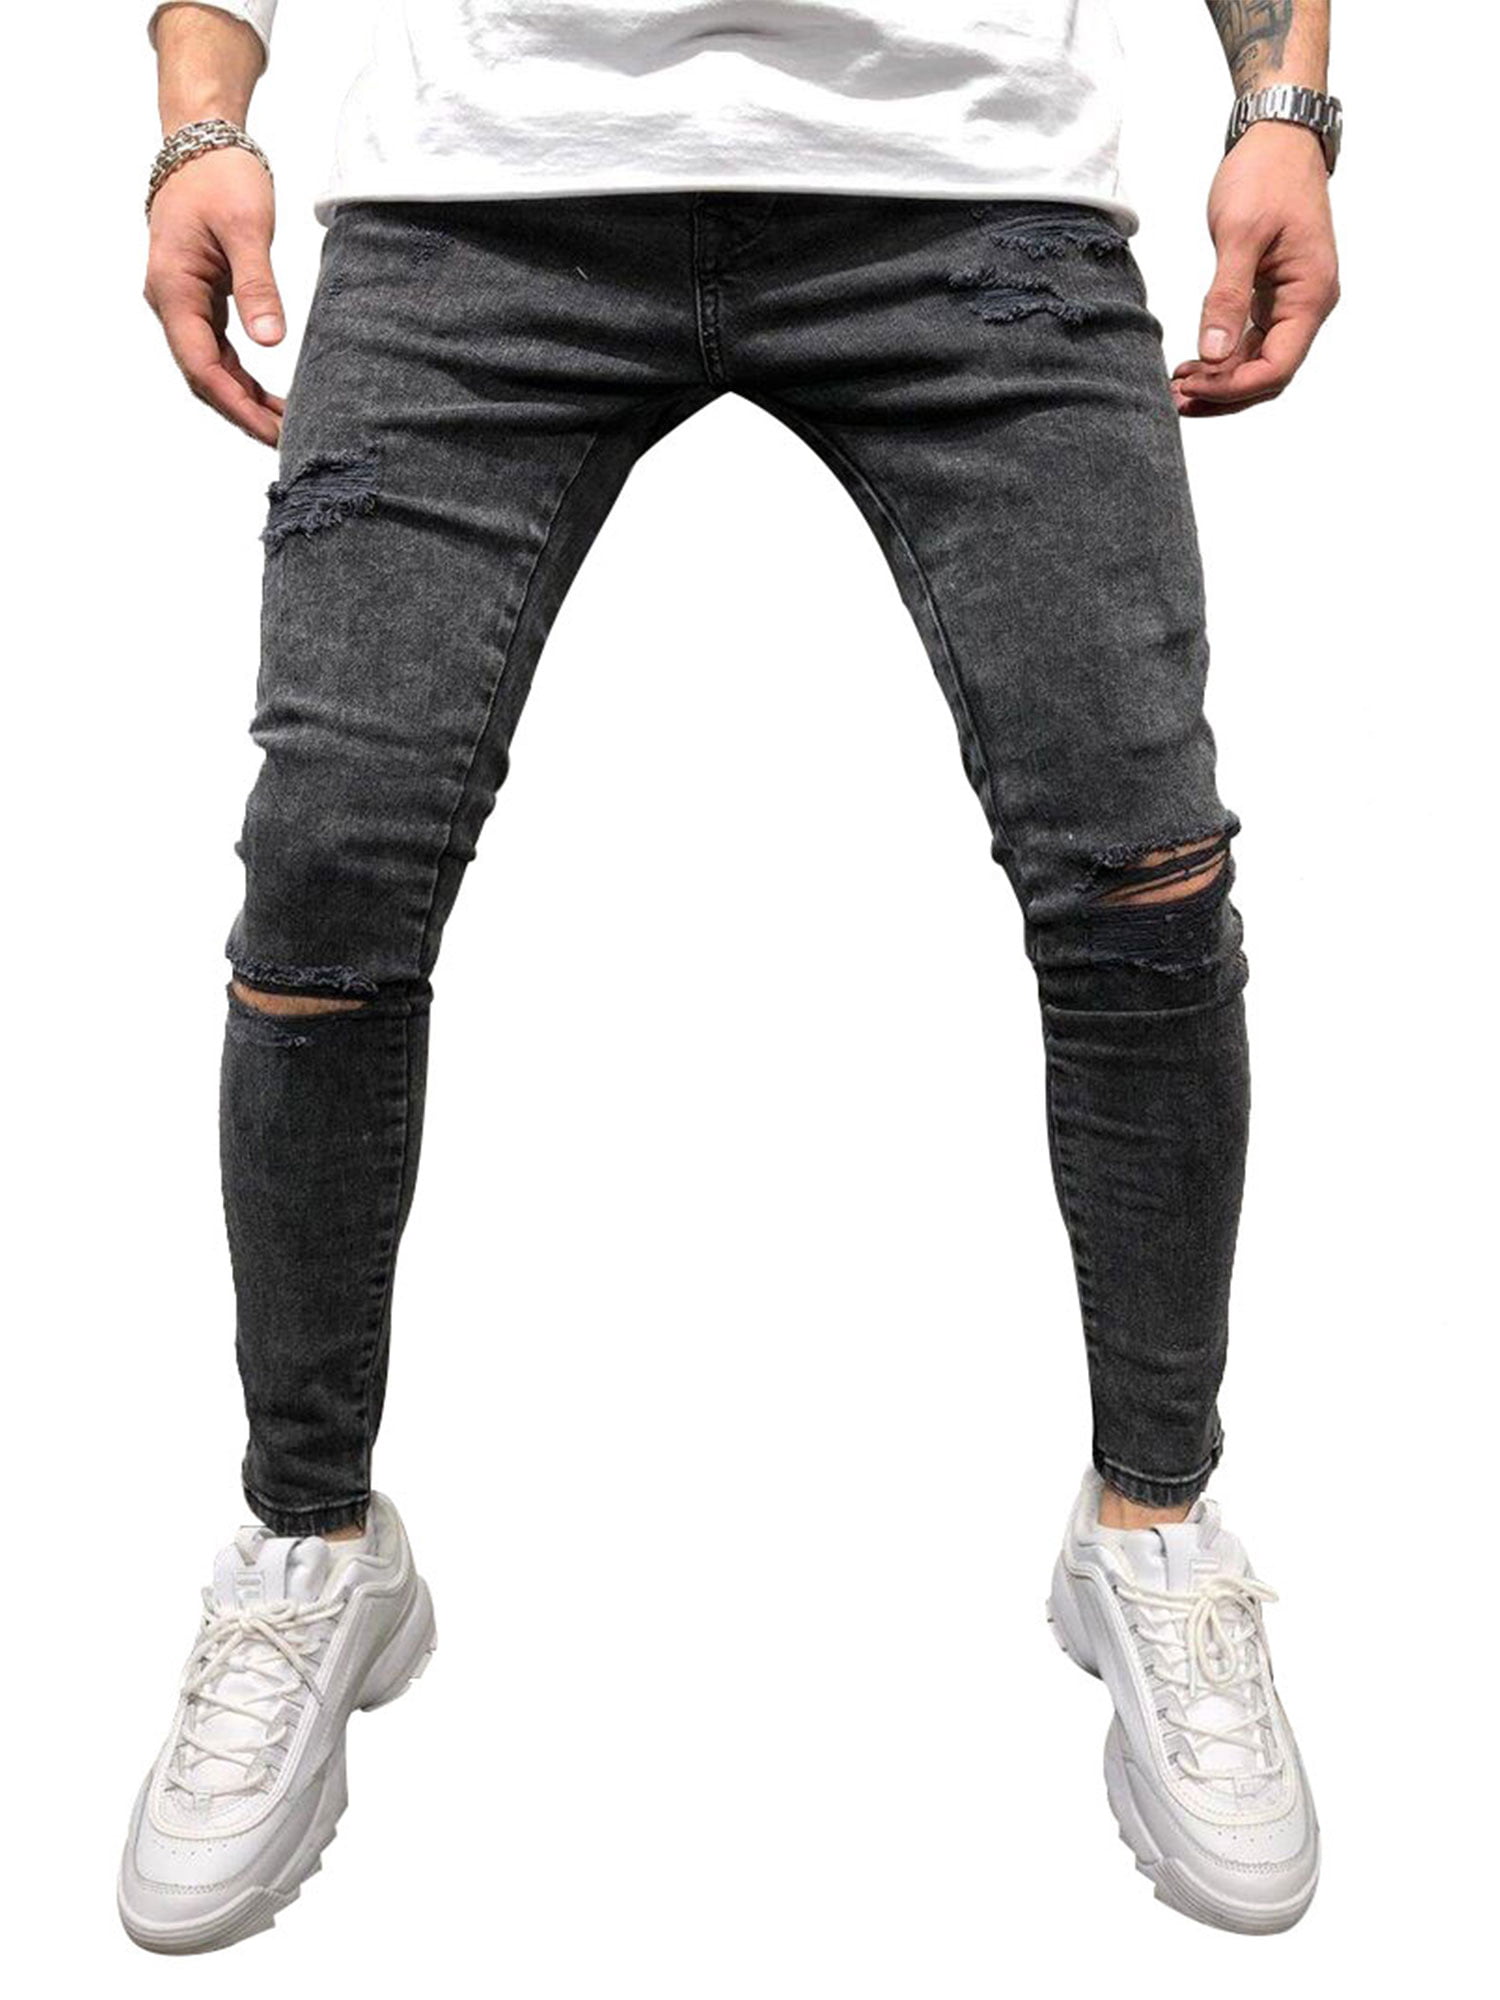 Mens Skinny Ripped Jeans Biker Casual Destroyed Stretchy Denim Slim Fit Trousers 